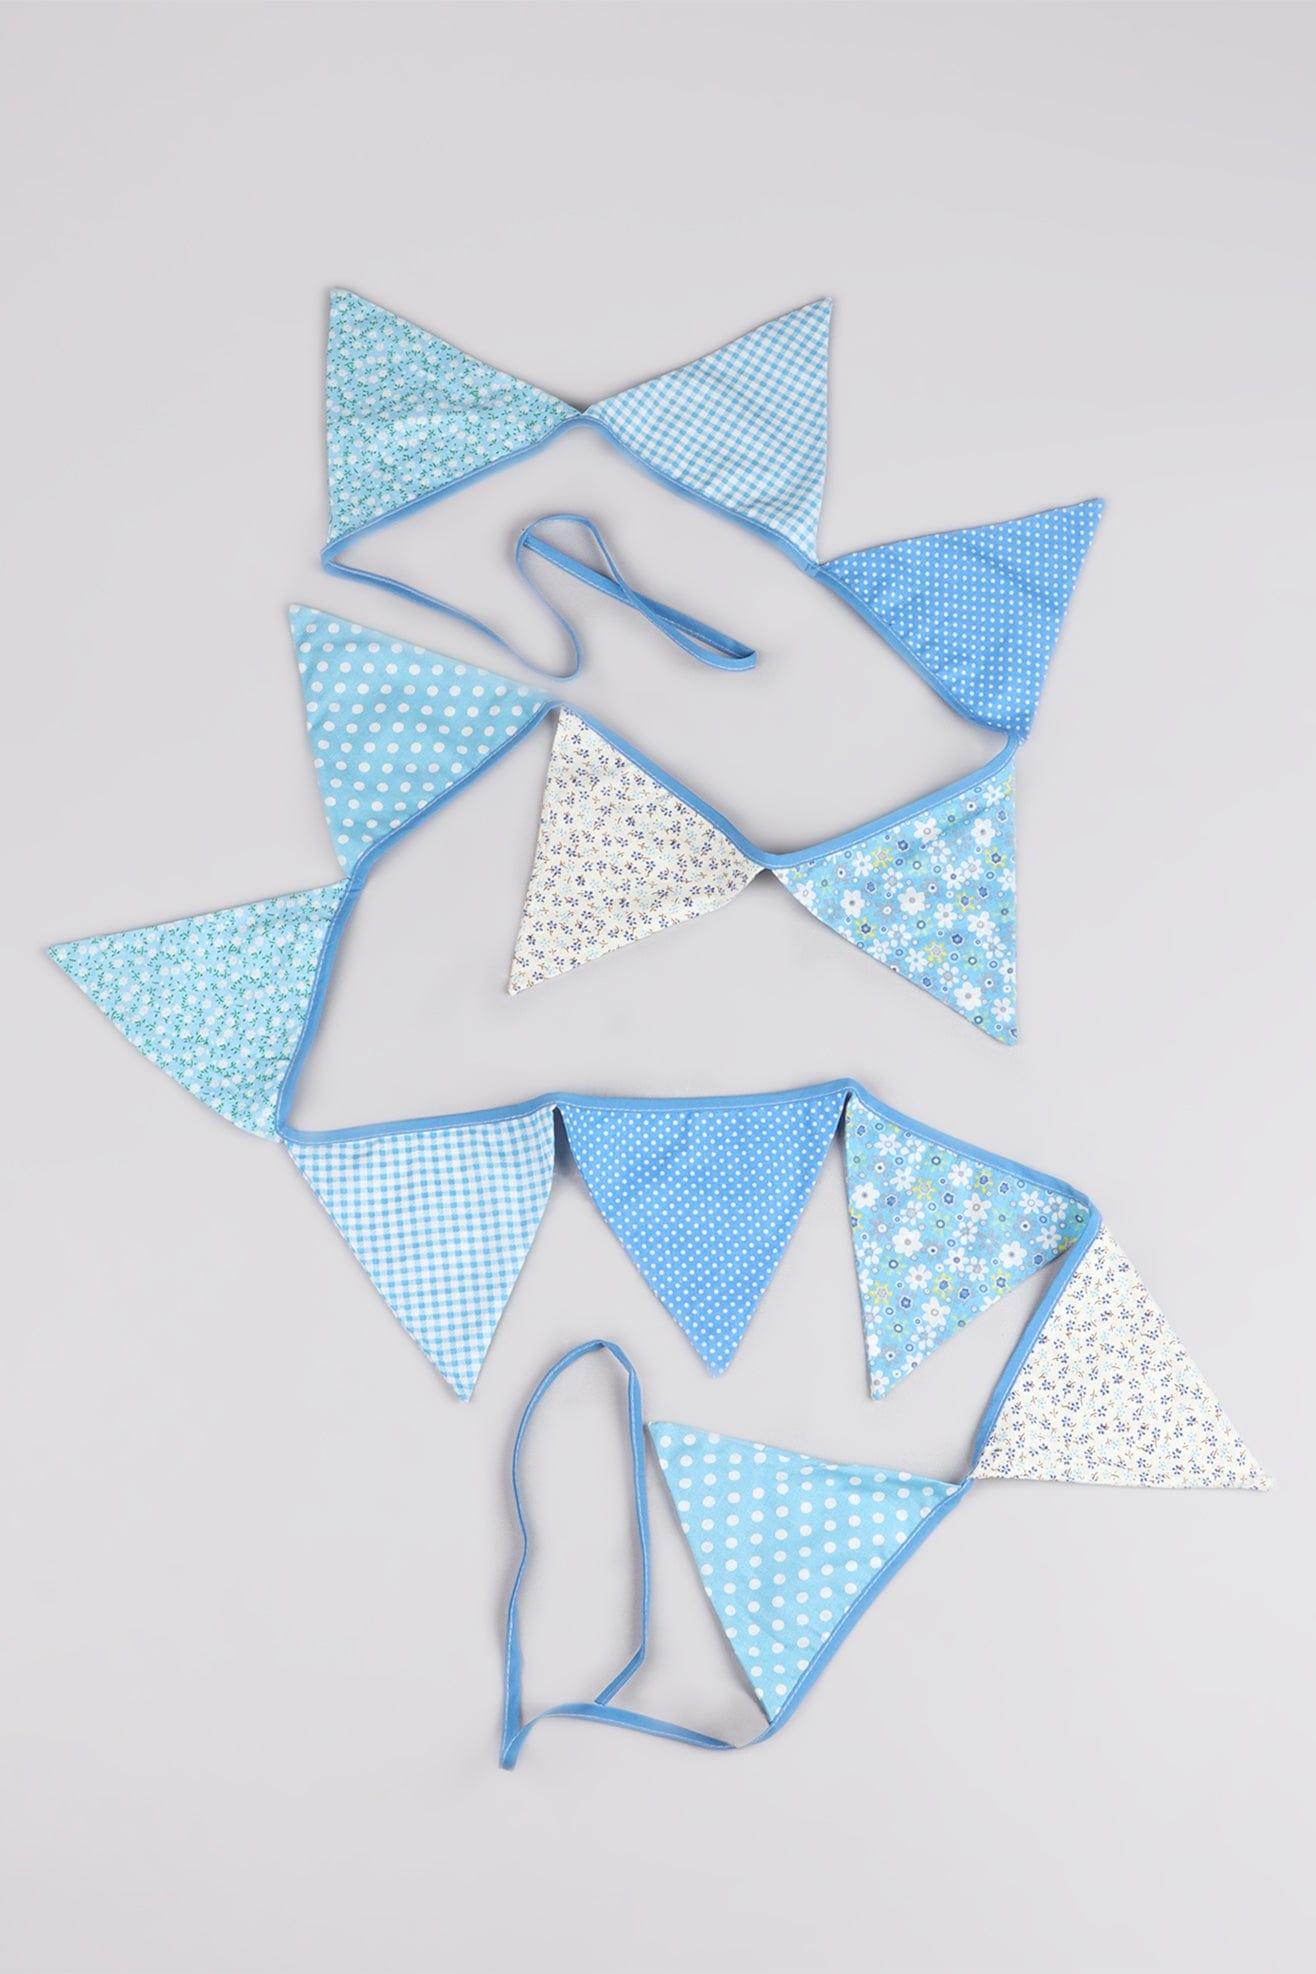 G Decor Bunting Blue Whimsical Waves: Blue and White Patterned Cloth Bunting